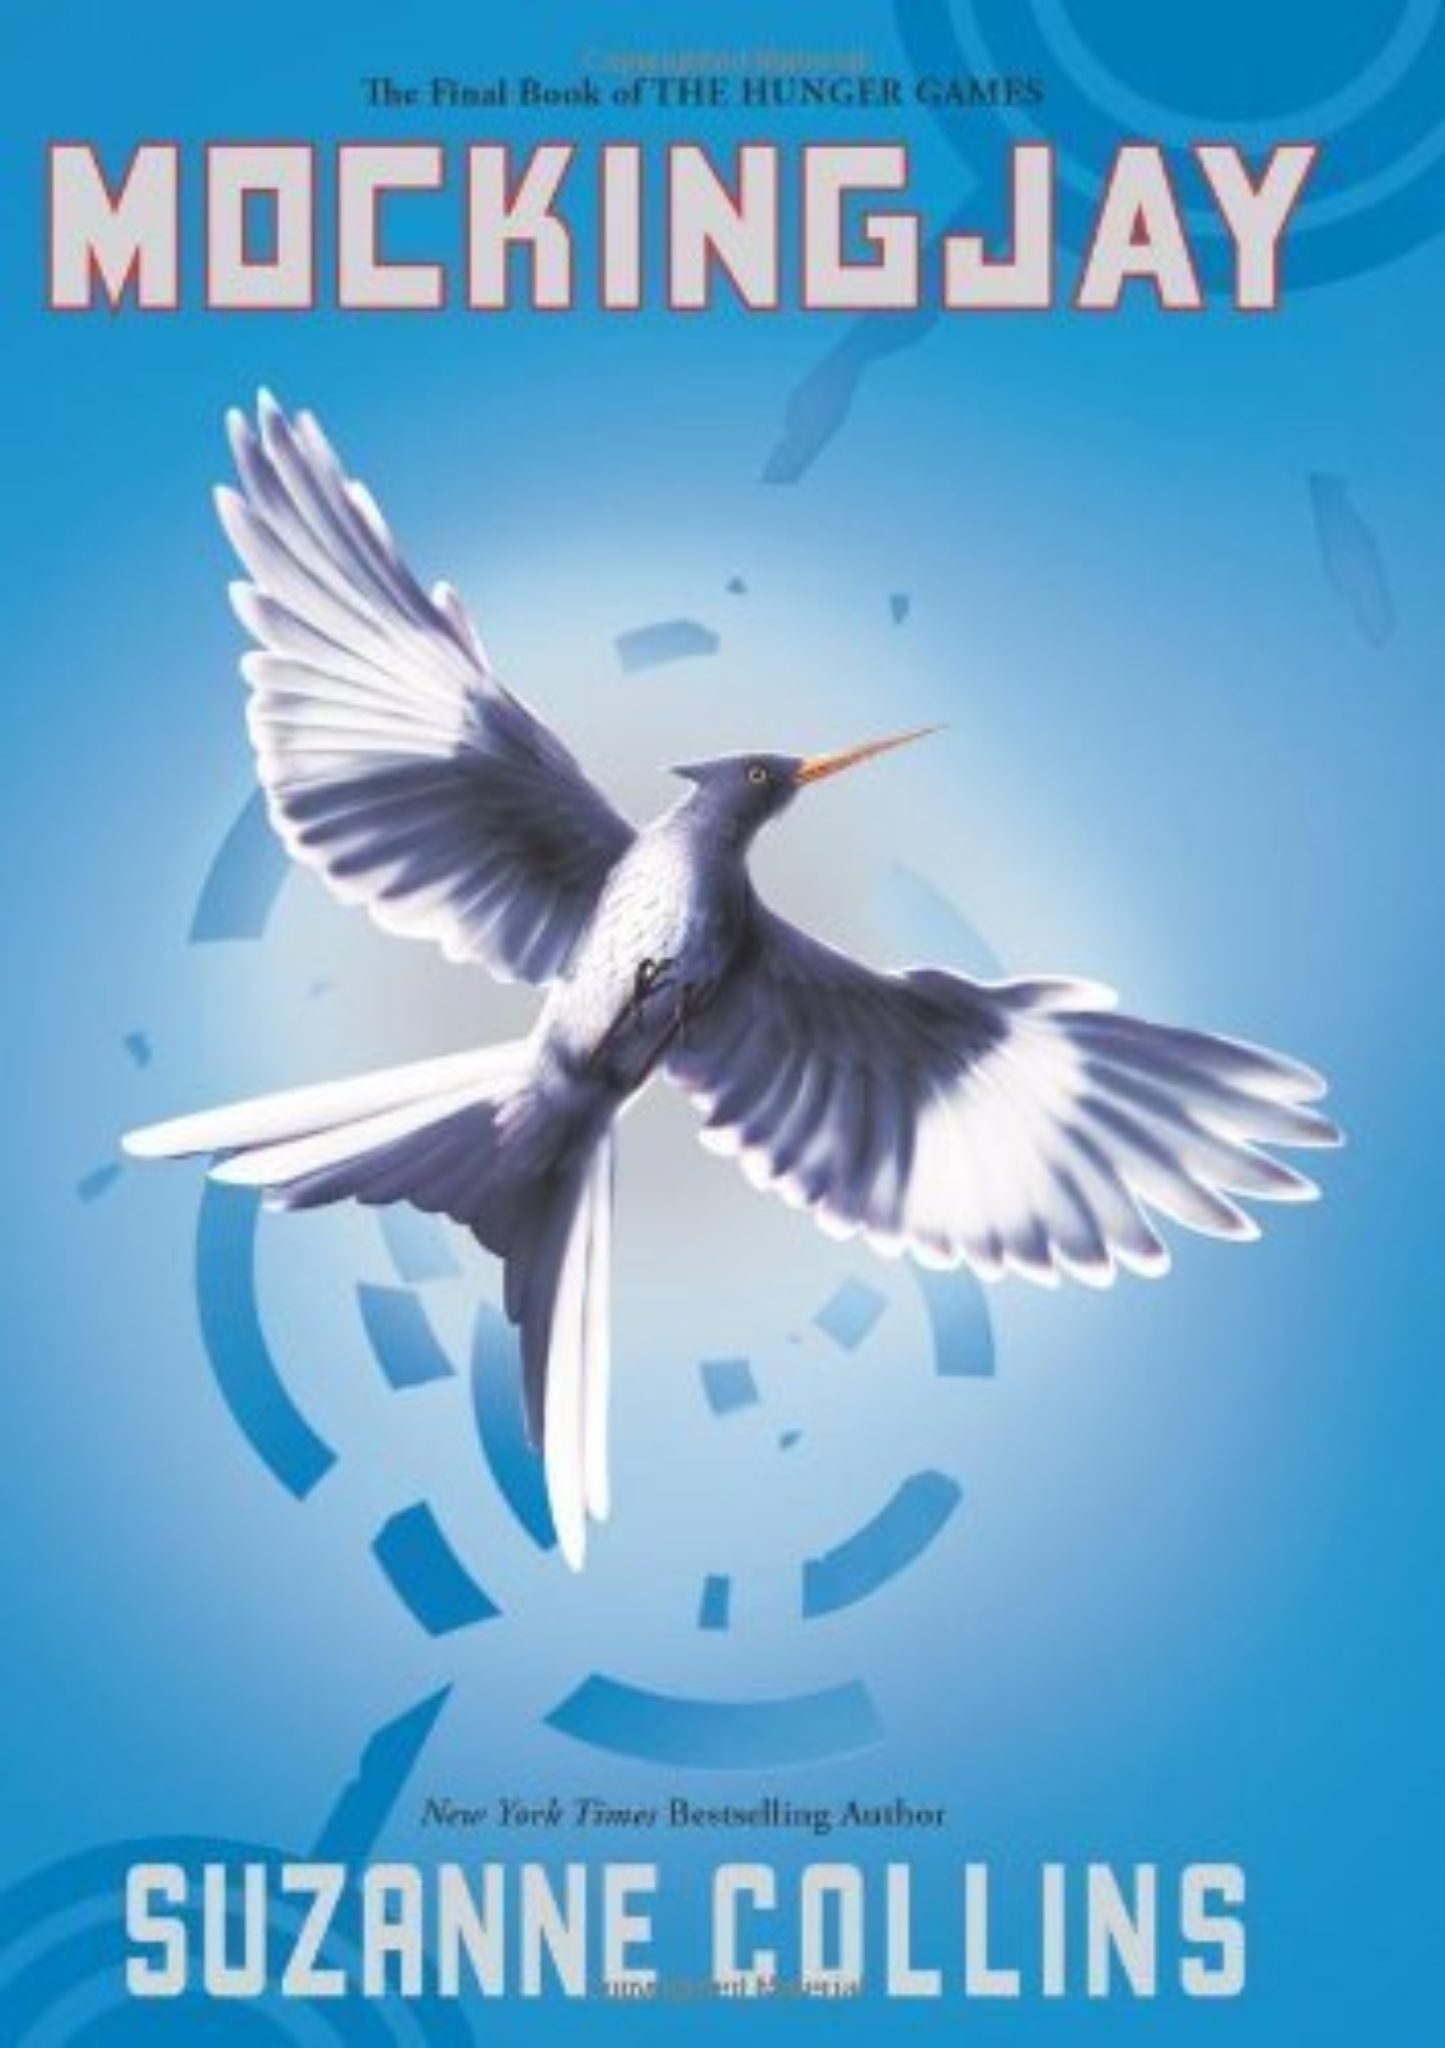 Mockingjay — "Hunger Games" Series Plugged In